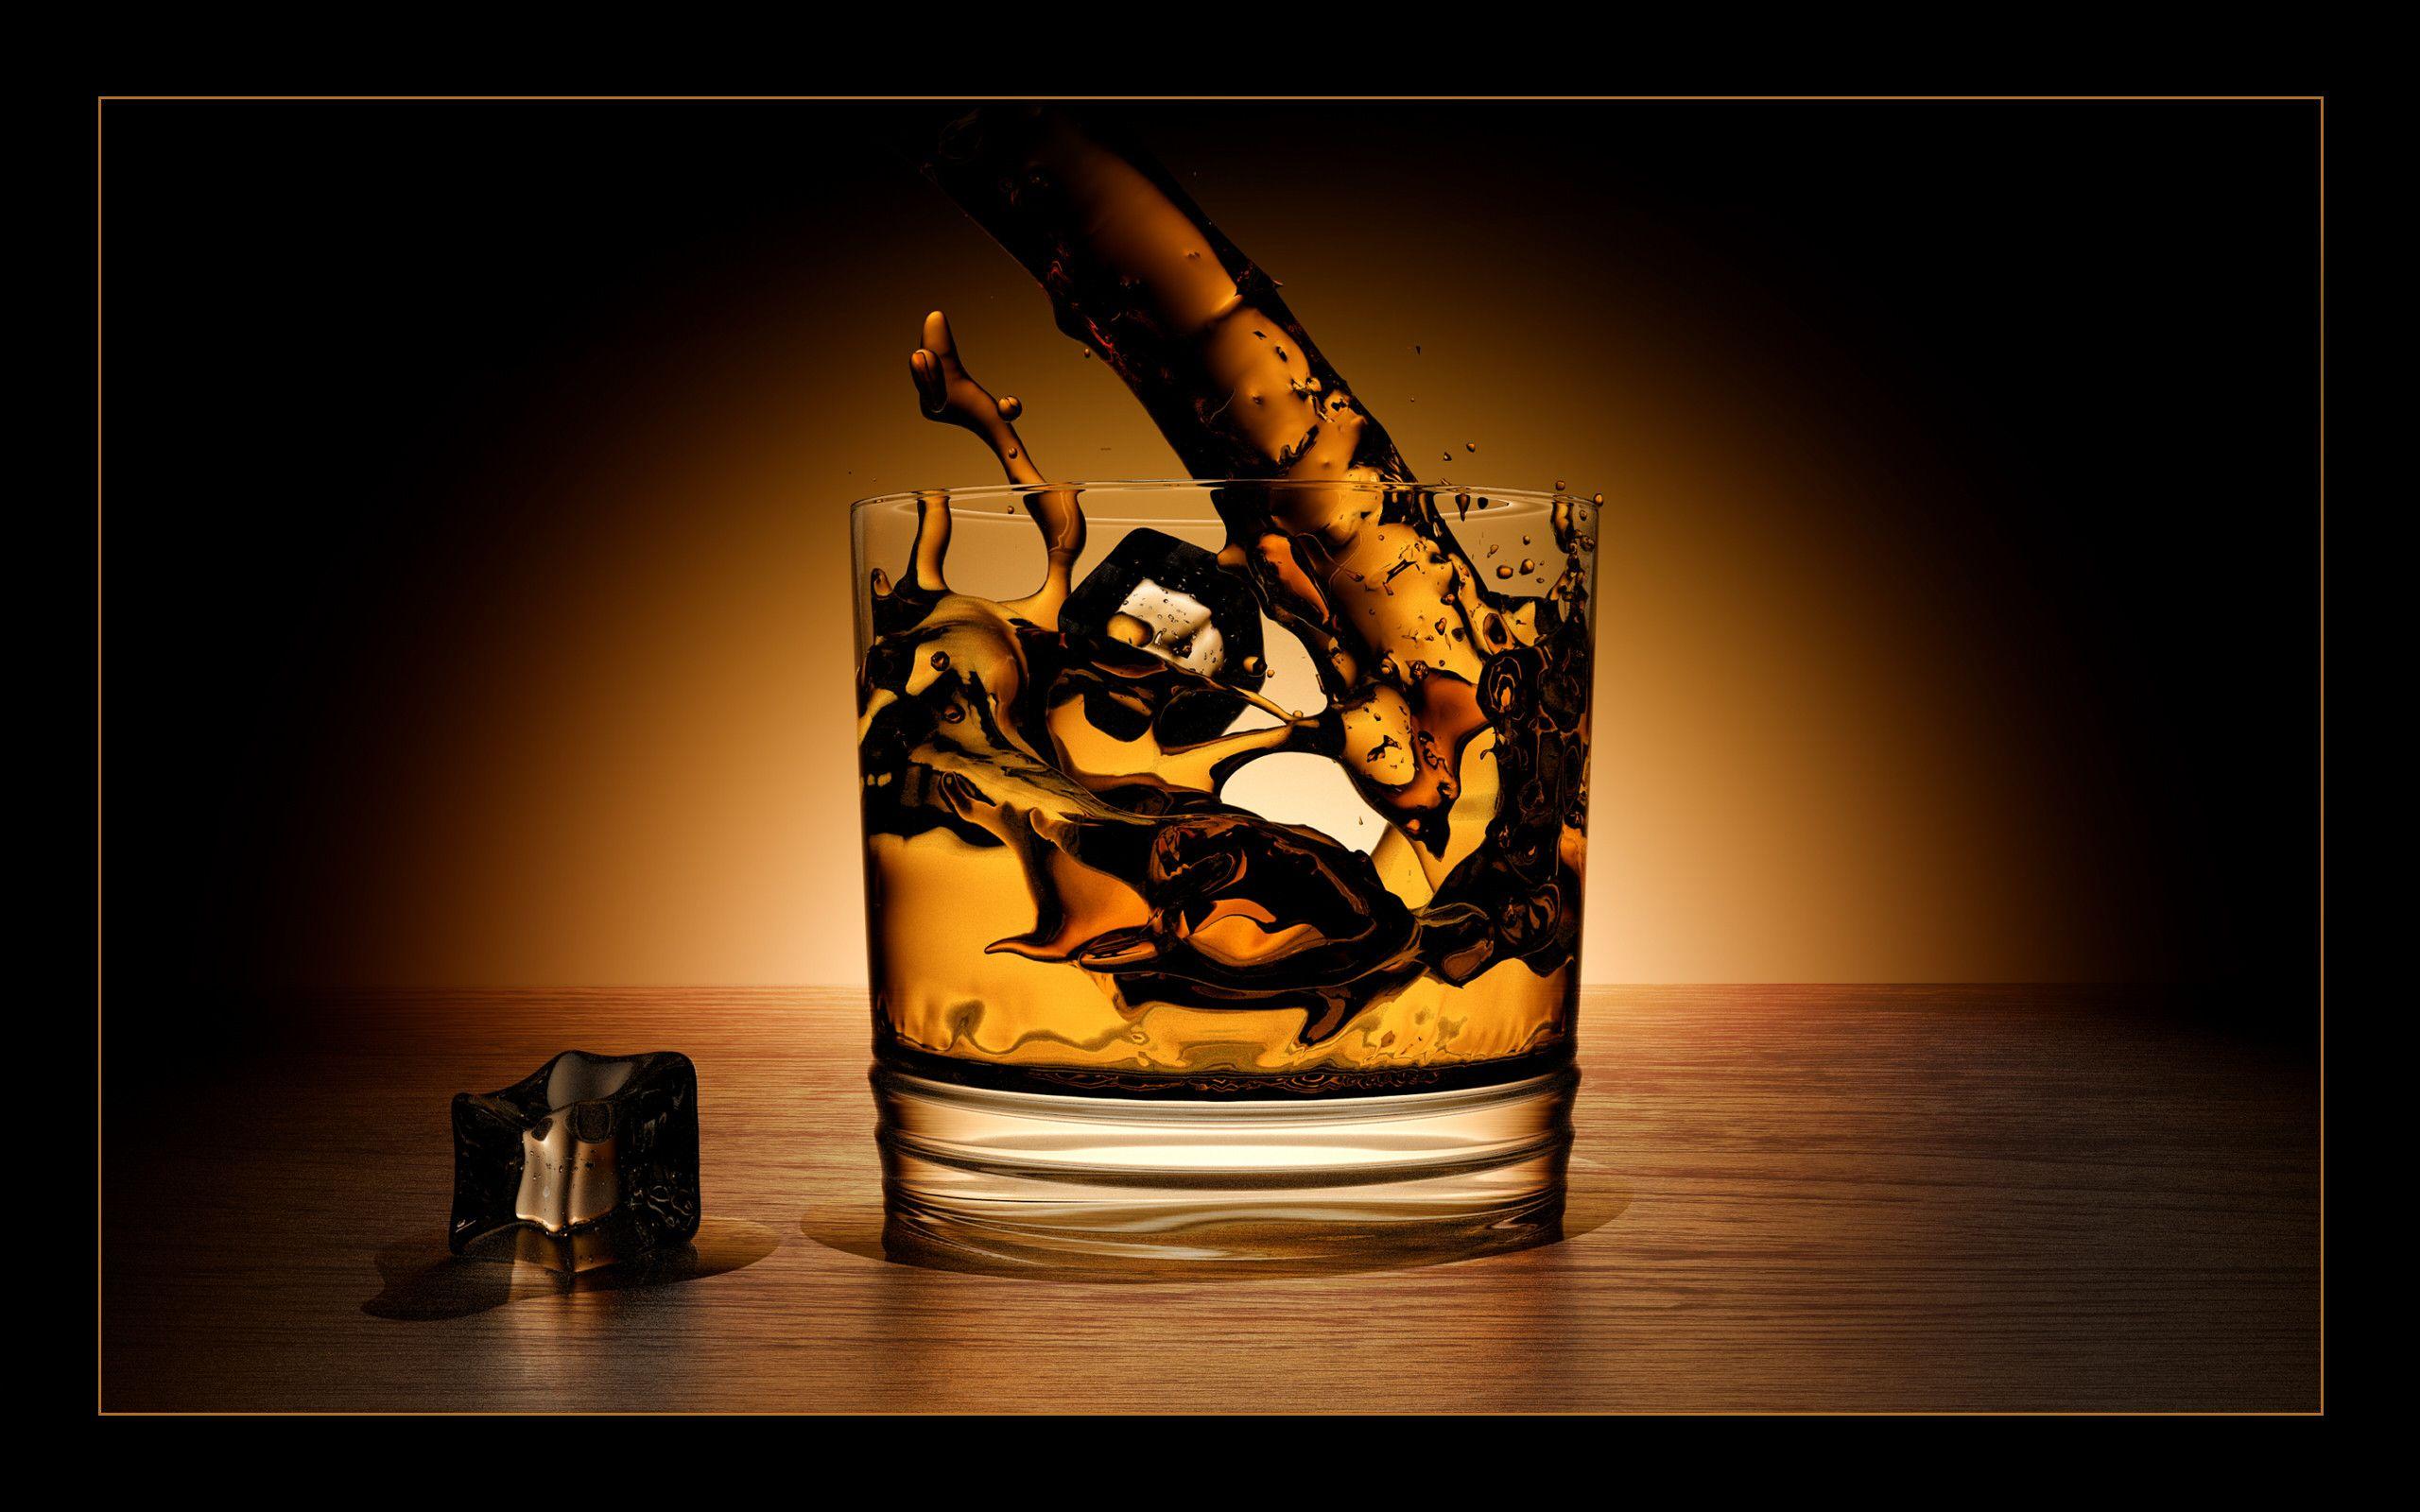 Download Monkey Shoulder Scotch Whisky In The Dark Wallpaper | Wallpapers .com